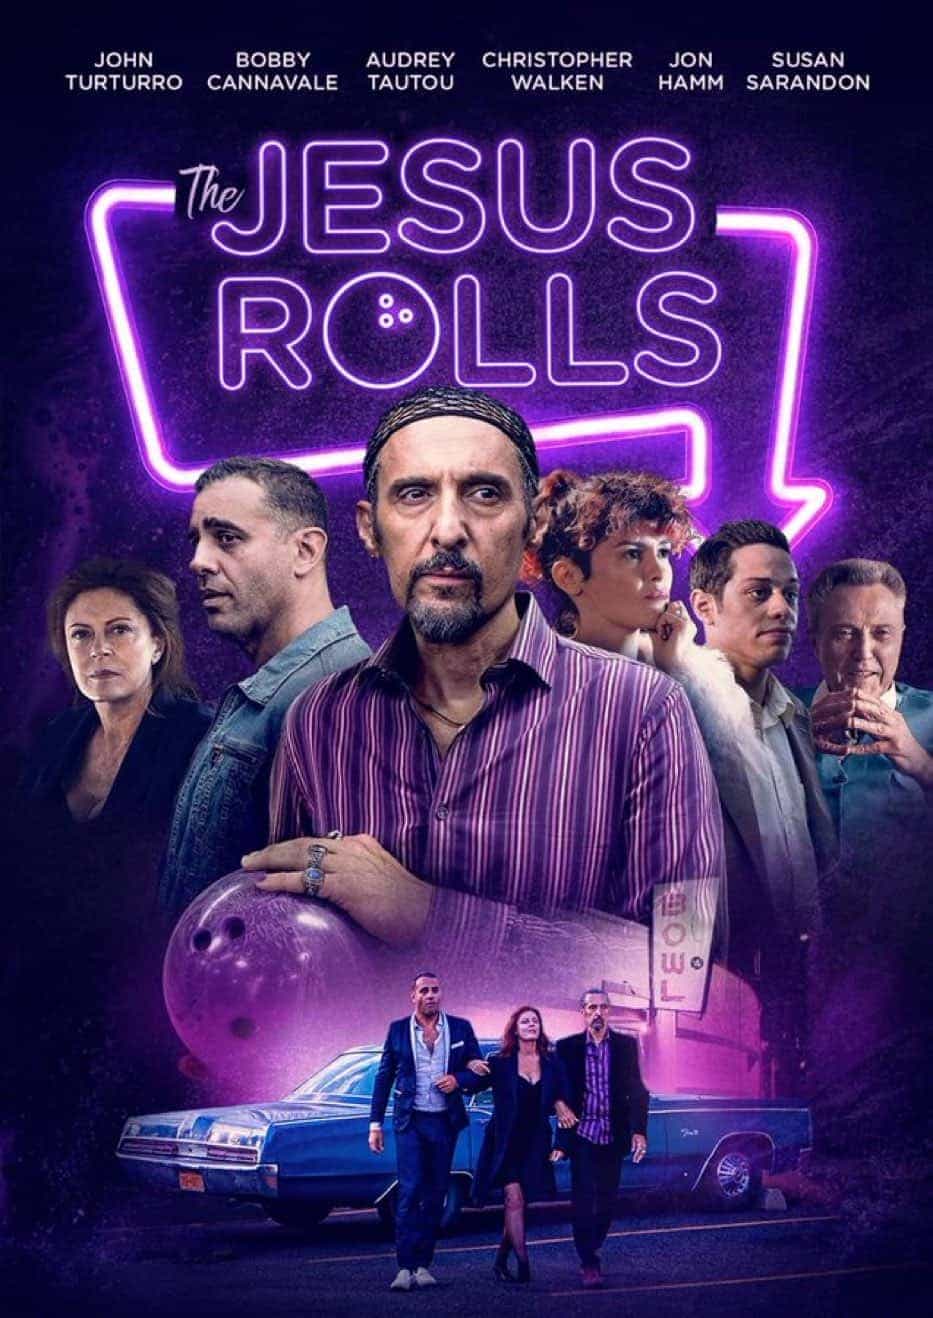 UK box office preview for weekend Friday, 20th March 2020 - The Jesus Rolls and Radioactive